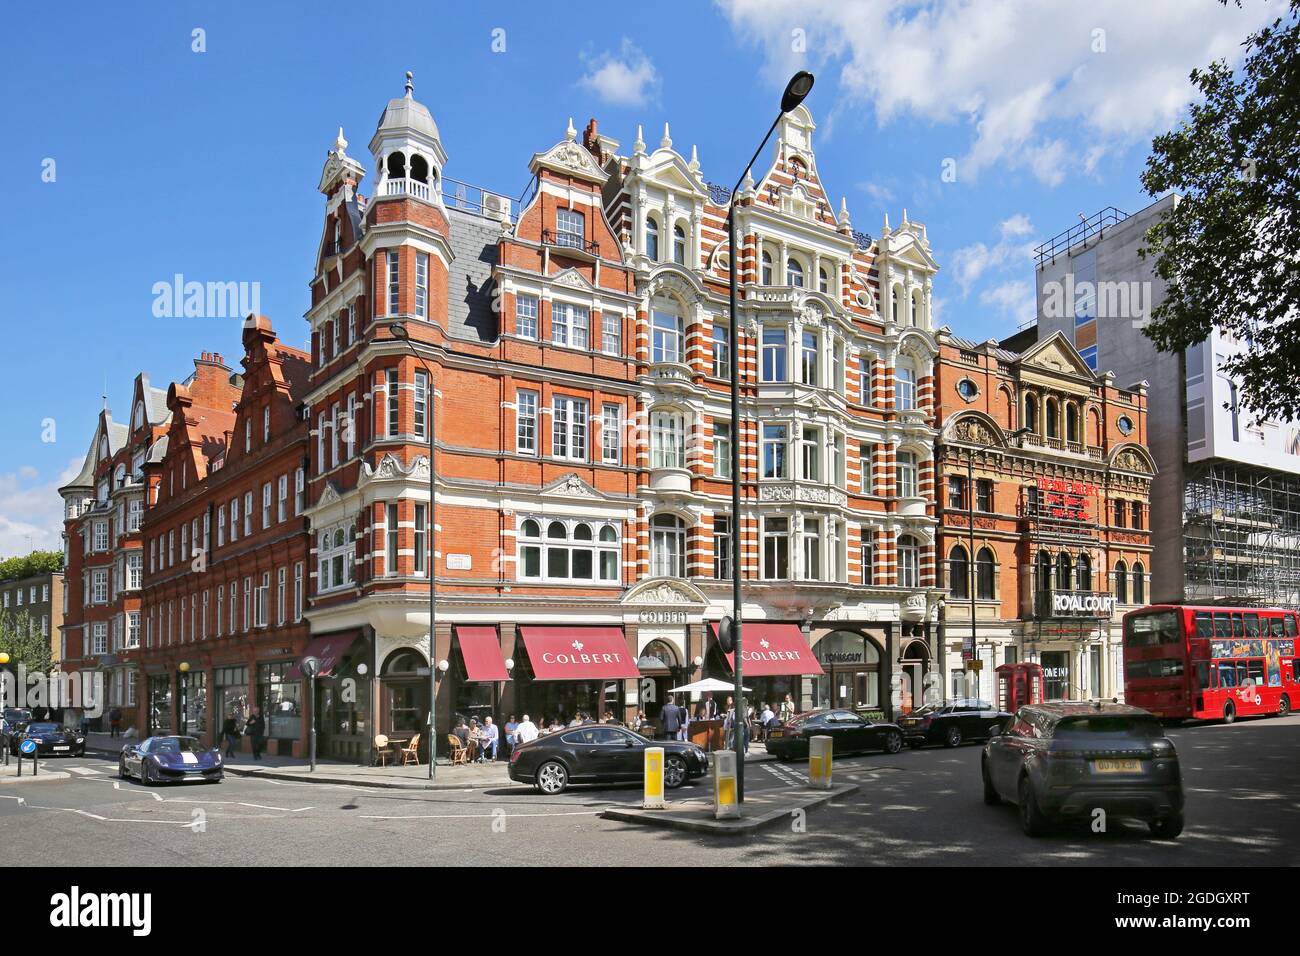 Sloane Square, Chelsea, London, UK. Shows the Colbert Building (centre) and Royal Court Theatre (right). Renouned as London's most affluent district. Stock Photo